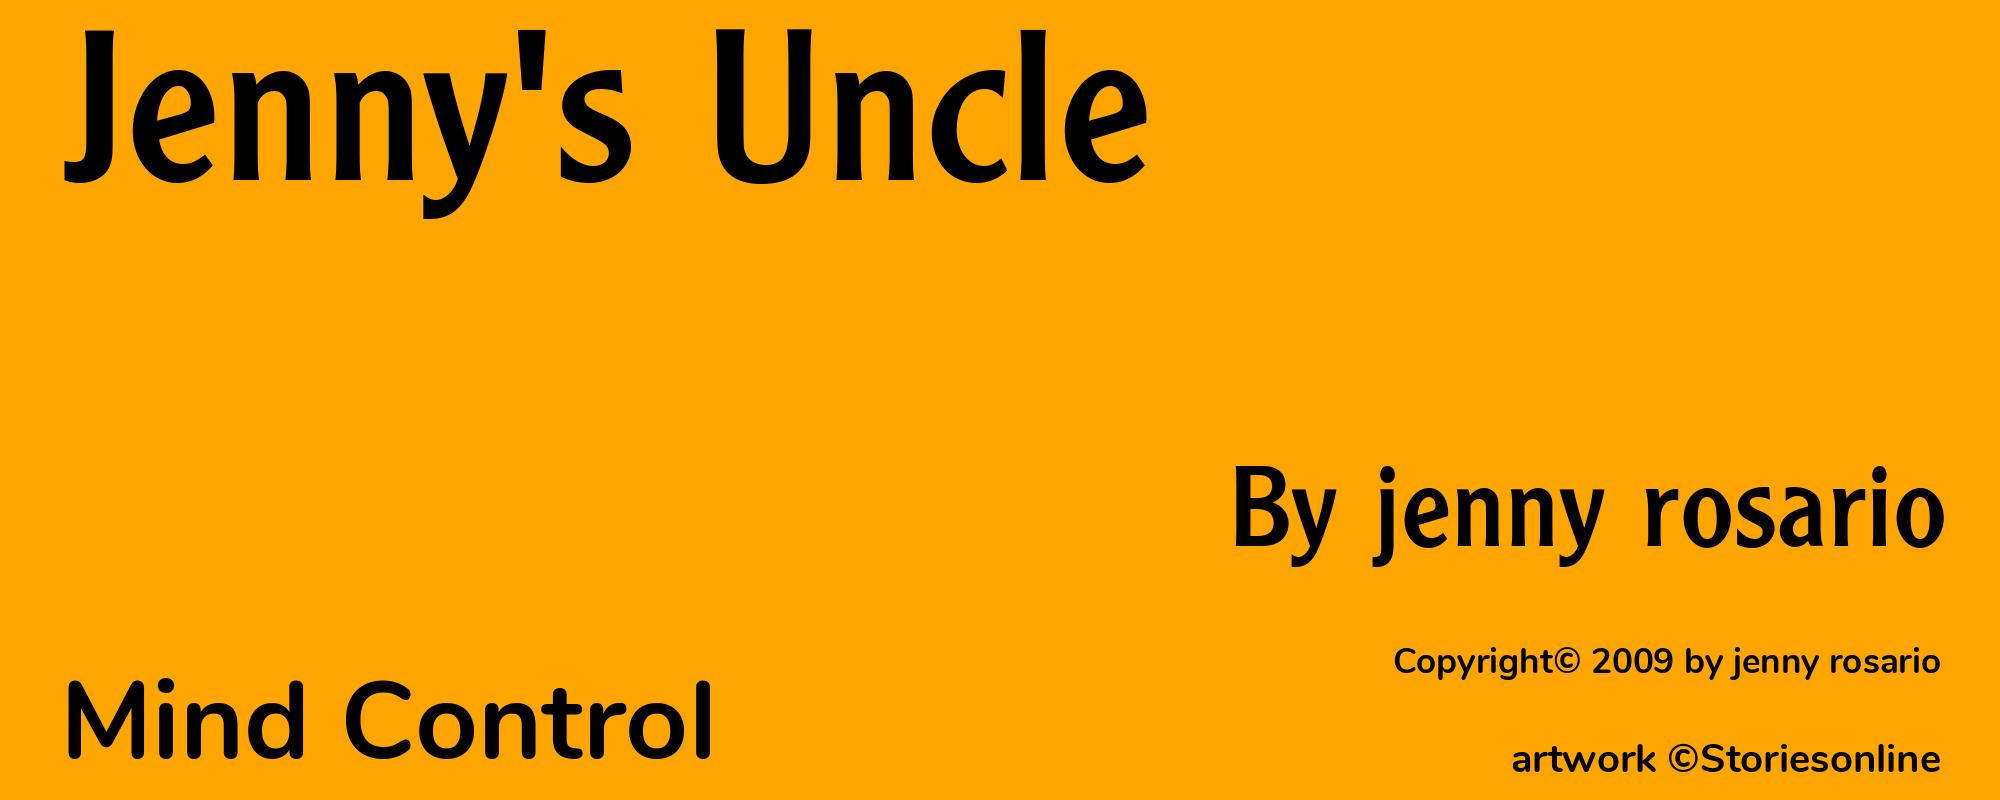 Jenny's Uncle - Cover